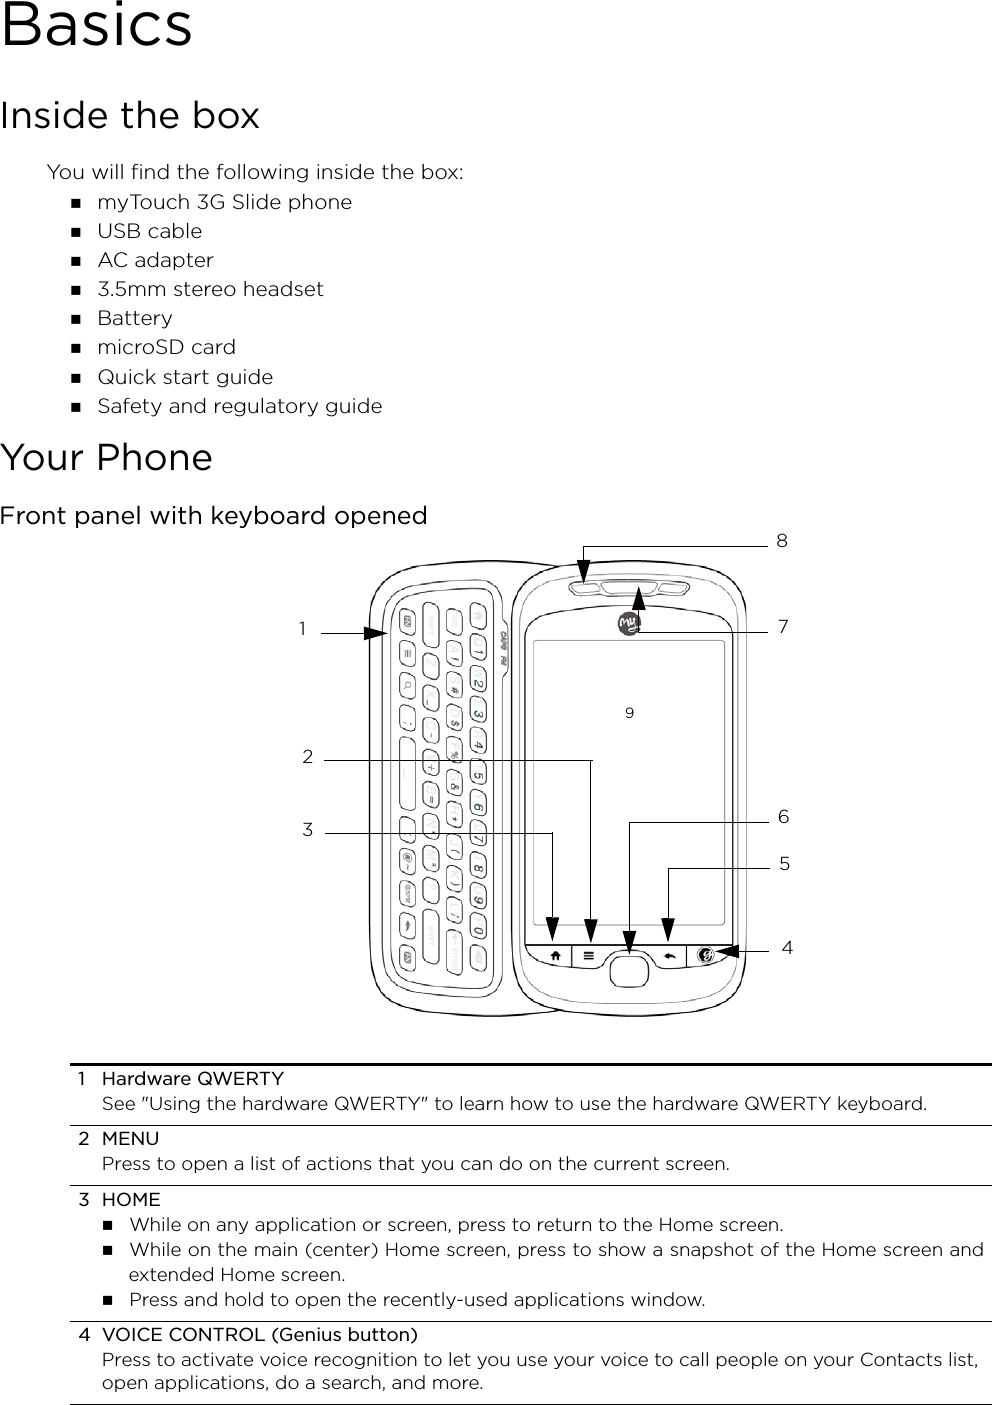 BasicsInside the boxYou will find the following inside the box:  myTouch 3G Slide phone USB cable AC adapter 3.5mm stereo headset Battery microSD card  Quick start guide Safety and regulatory guideYour PhoneFront panel with keyboard opened         1 Hardware QWERTY See &quot;Using the hardware QWERTY&quot; to learn how to use the hardware QWERTY keyboard.2 MENUPress to open a list of actions that you can do on the current screen.3 HOME While on any application or screen, press to return to the Home screen. While on the main (center) Home screen, press to show a snapshot of the Home screen andextended Home screen.  Press and hold to open the recently-used applications window.4  VOICE CONTROL (Genius button)Press to activate voice recognition to let you use your voice to call people on your Contacts list, open applications, do a search, and more. 74325691 8